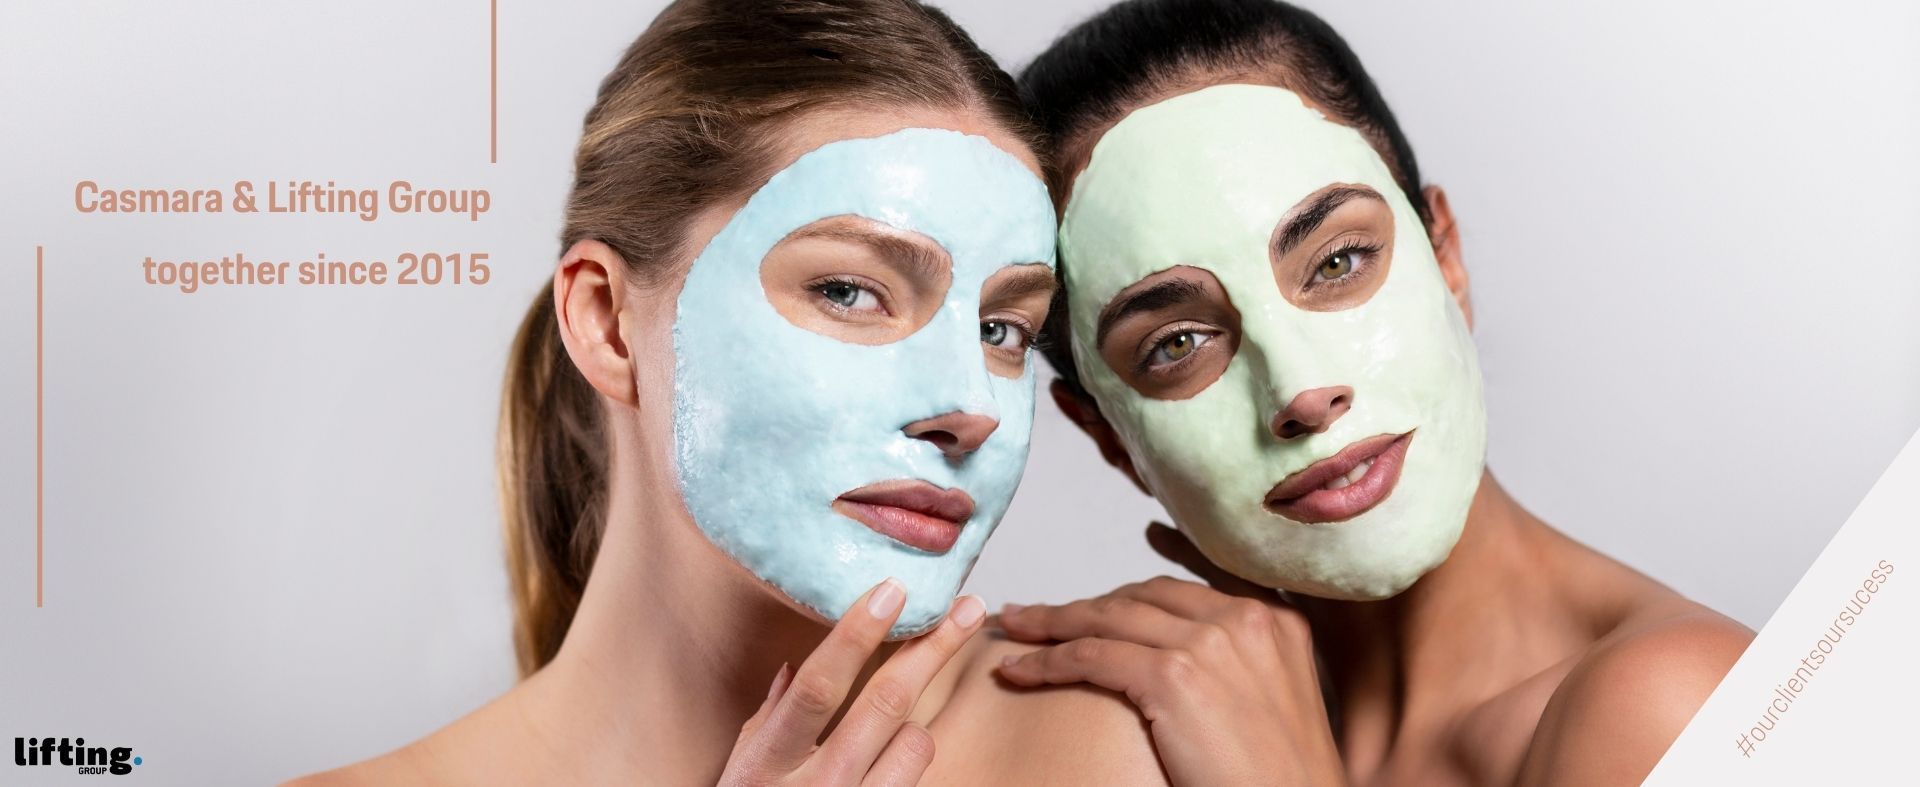 Casmara continues to trust Lifting Group as its Marketing Partner for the relaunch of its facial masks for use at home